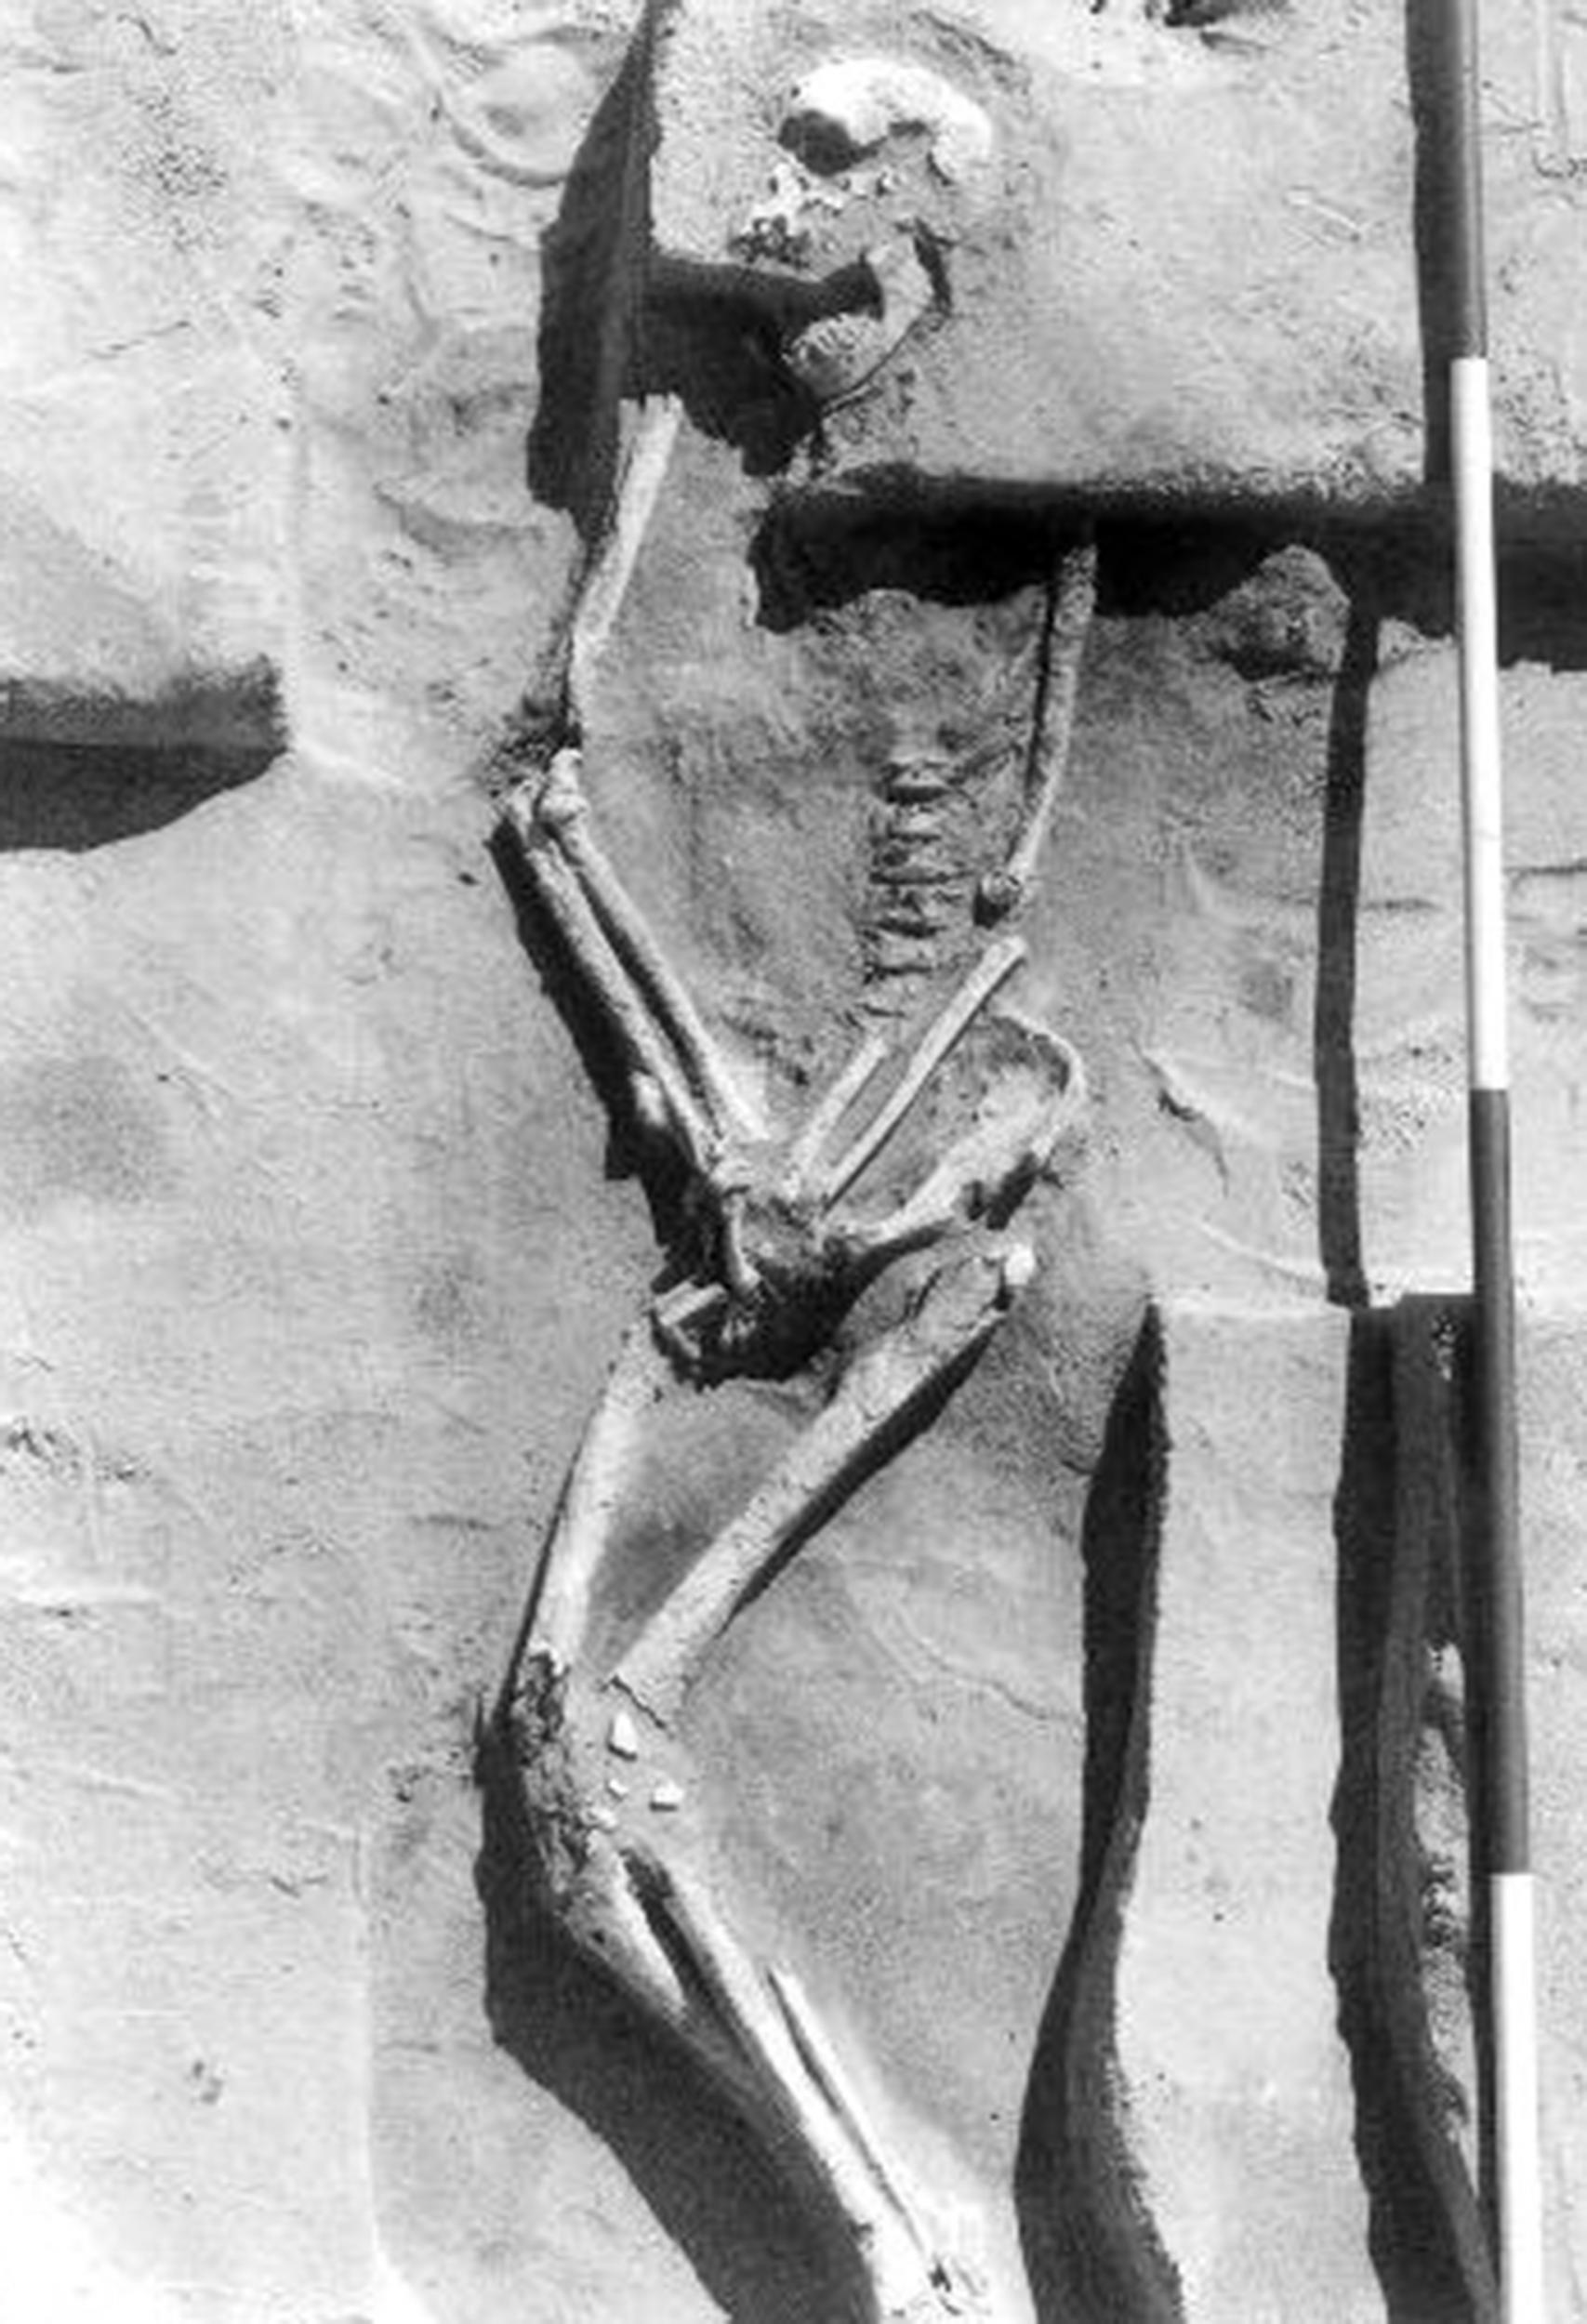 A 1974 photograph of Mr Mungo’s skeletal remains